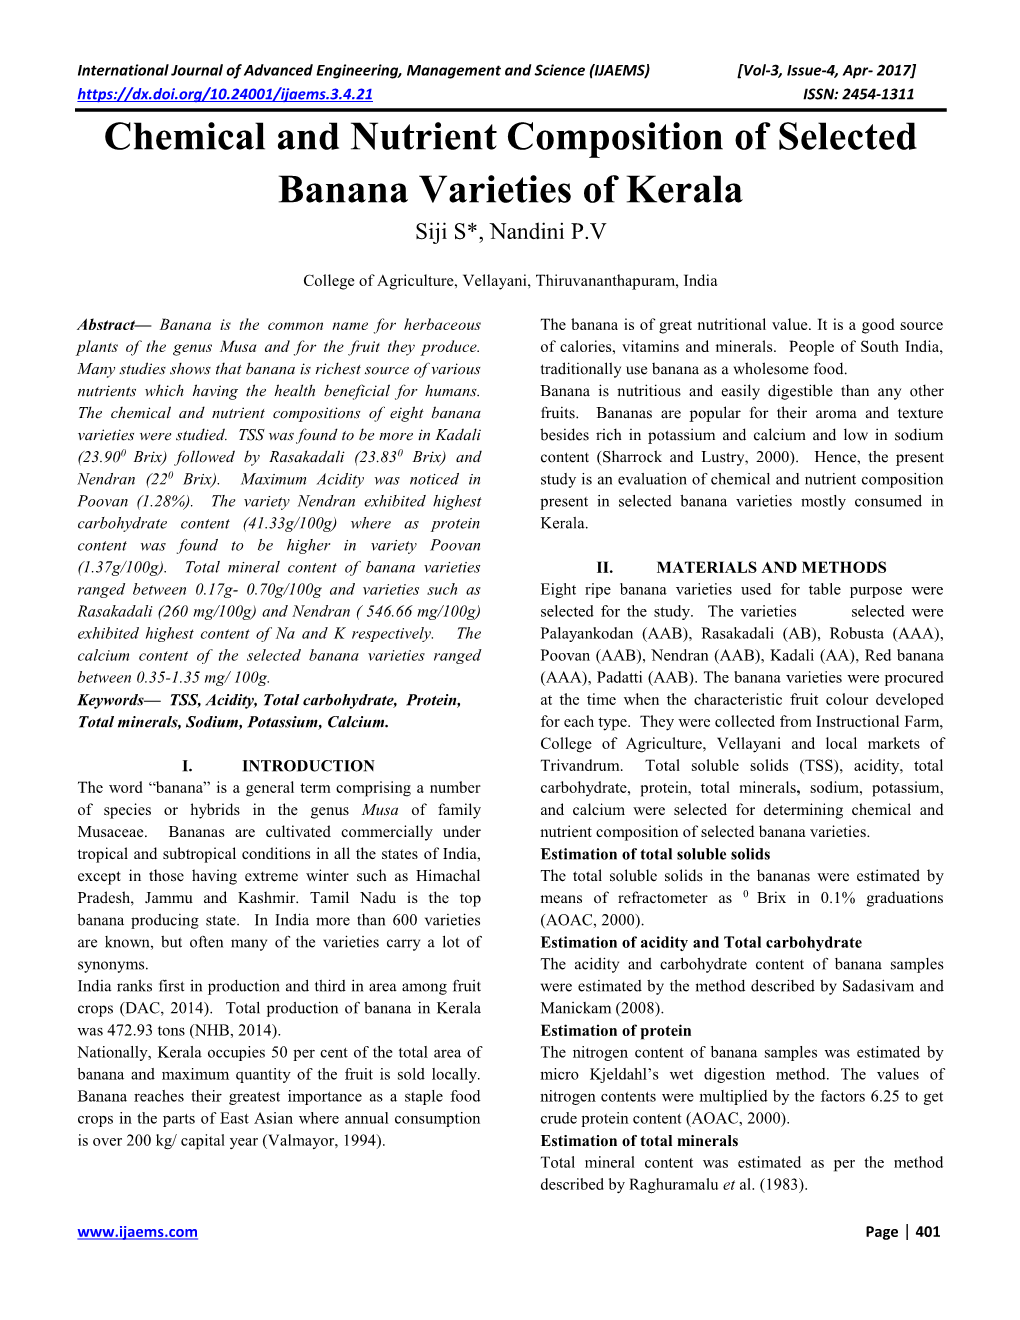 Chemical and Nutrient Composition of Selected Banana Varieties of Kerala Siji S*, Nandini P.V